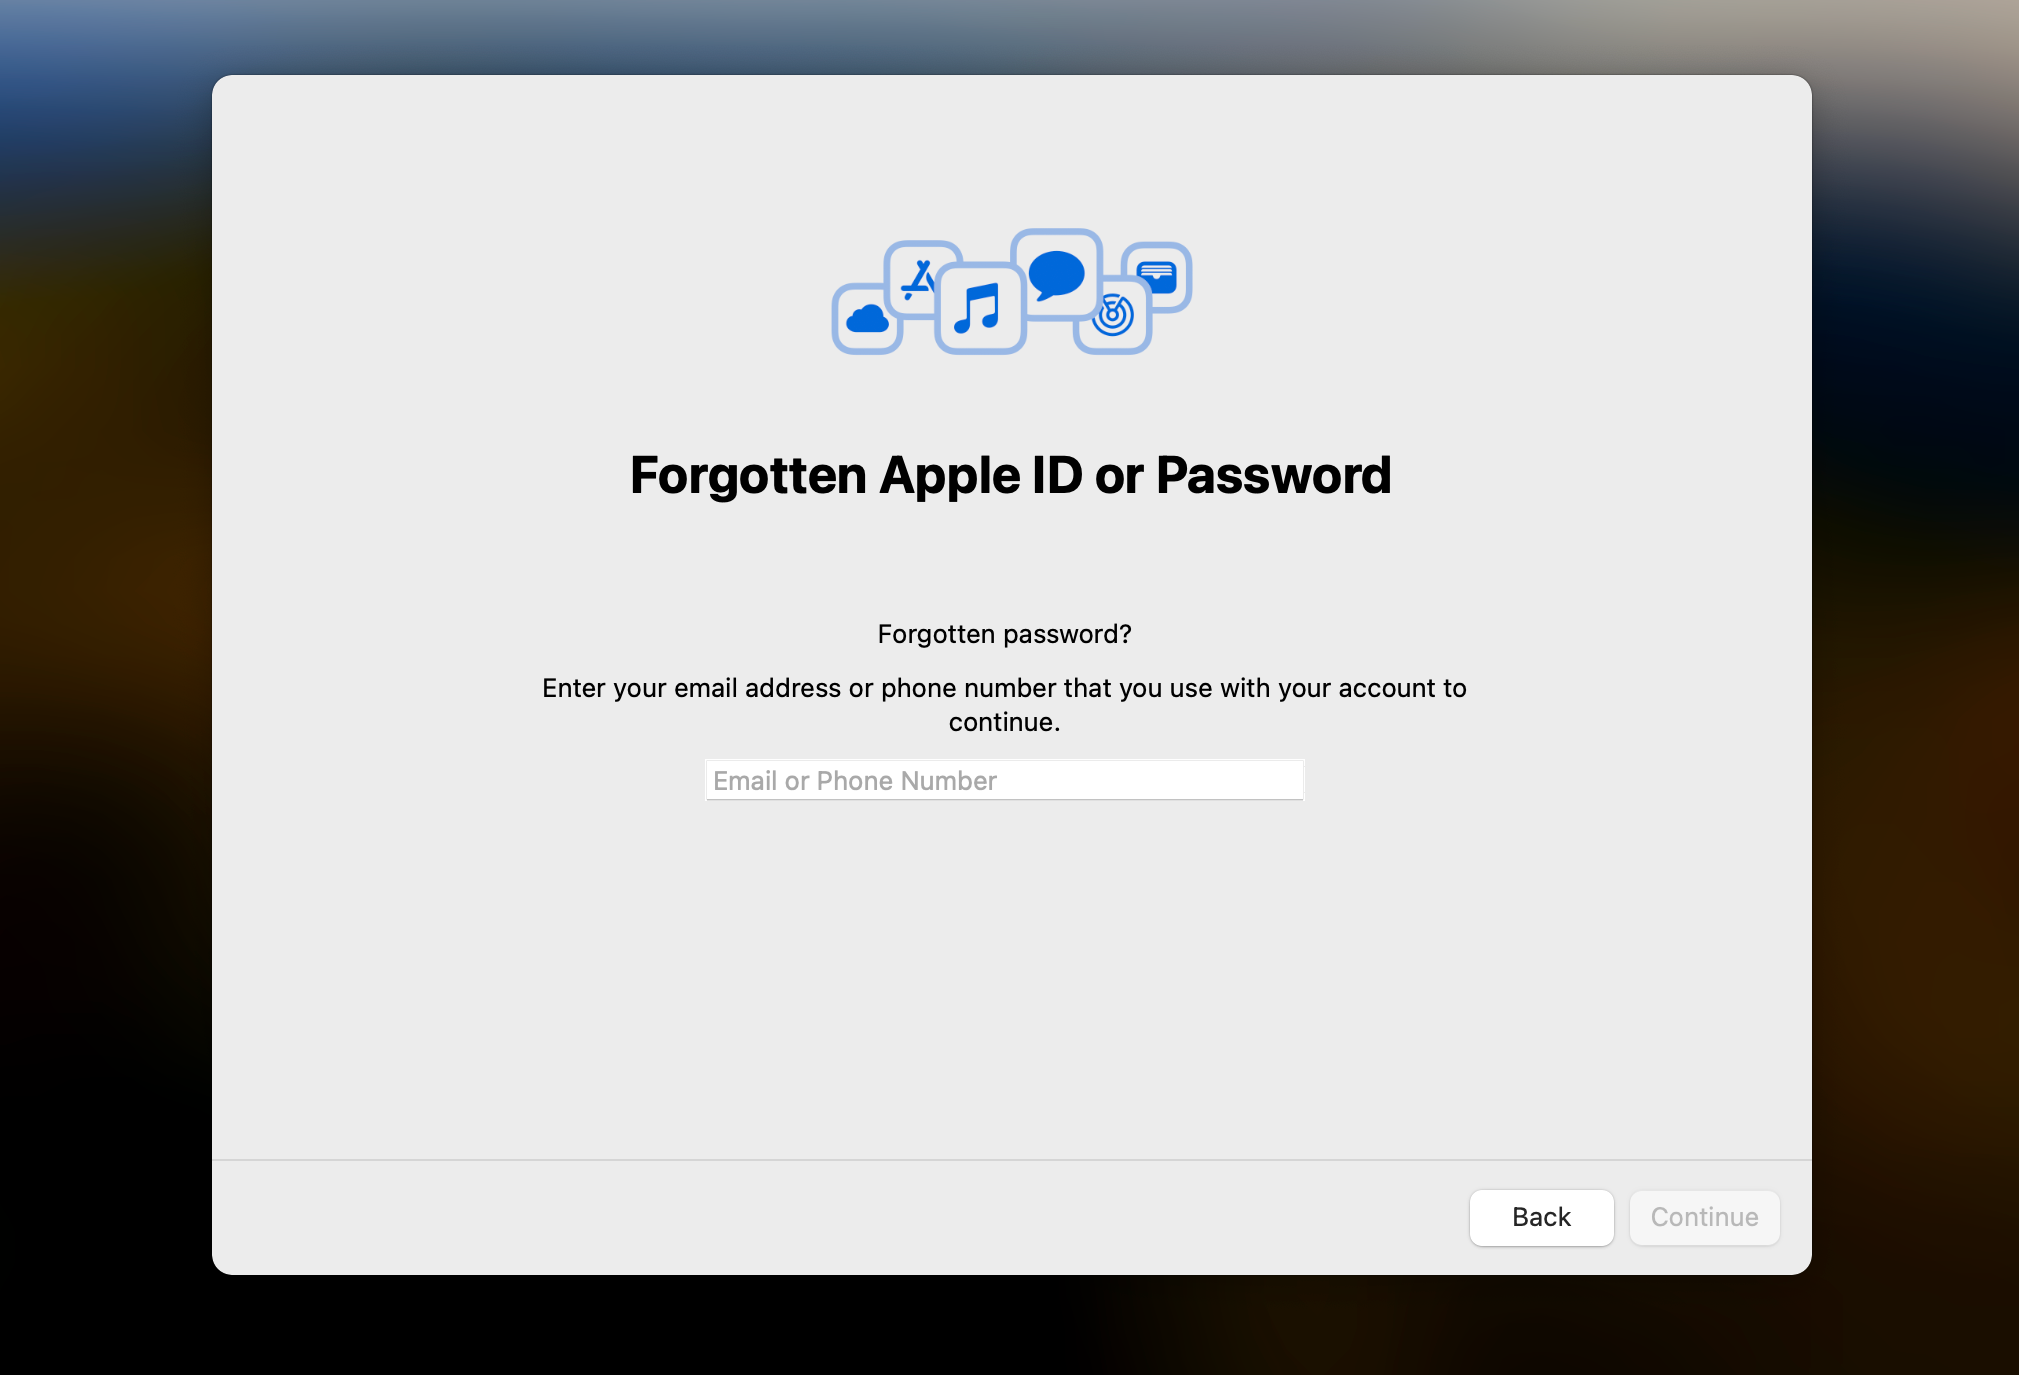 How to Reset Your Apple ID Password: 5 Simple Ways